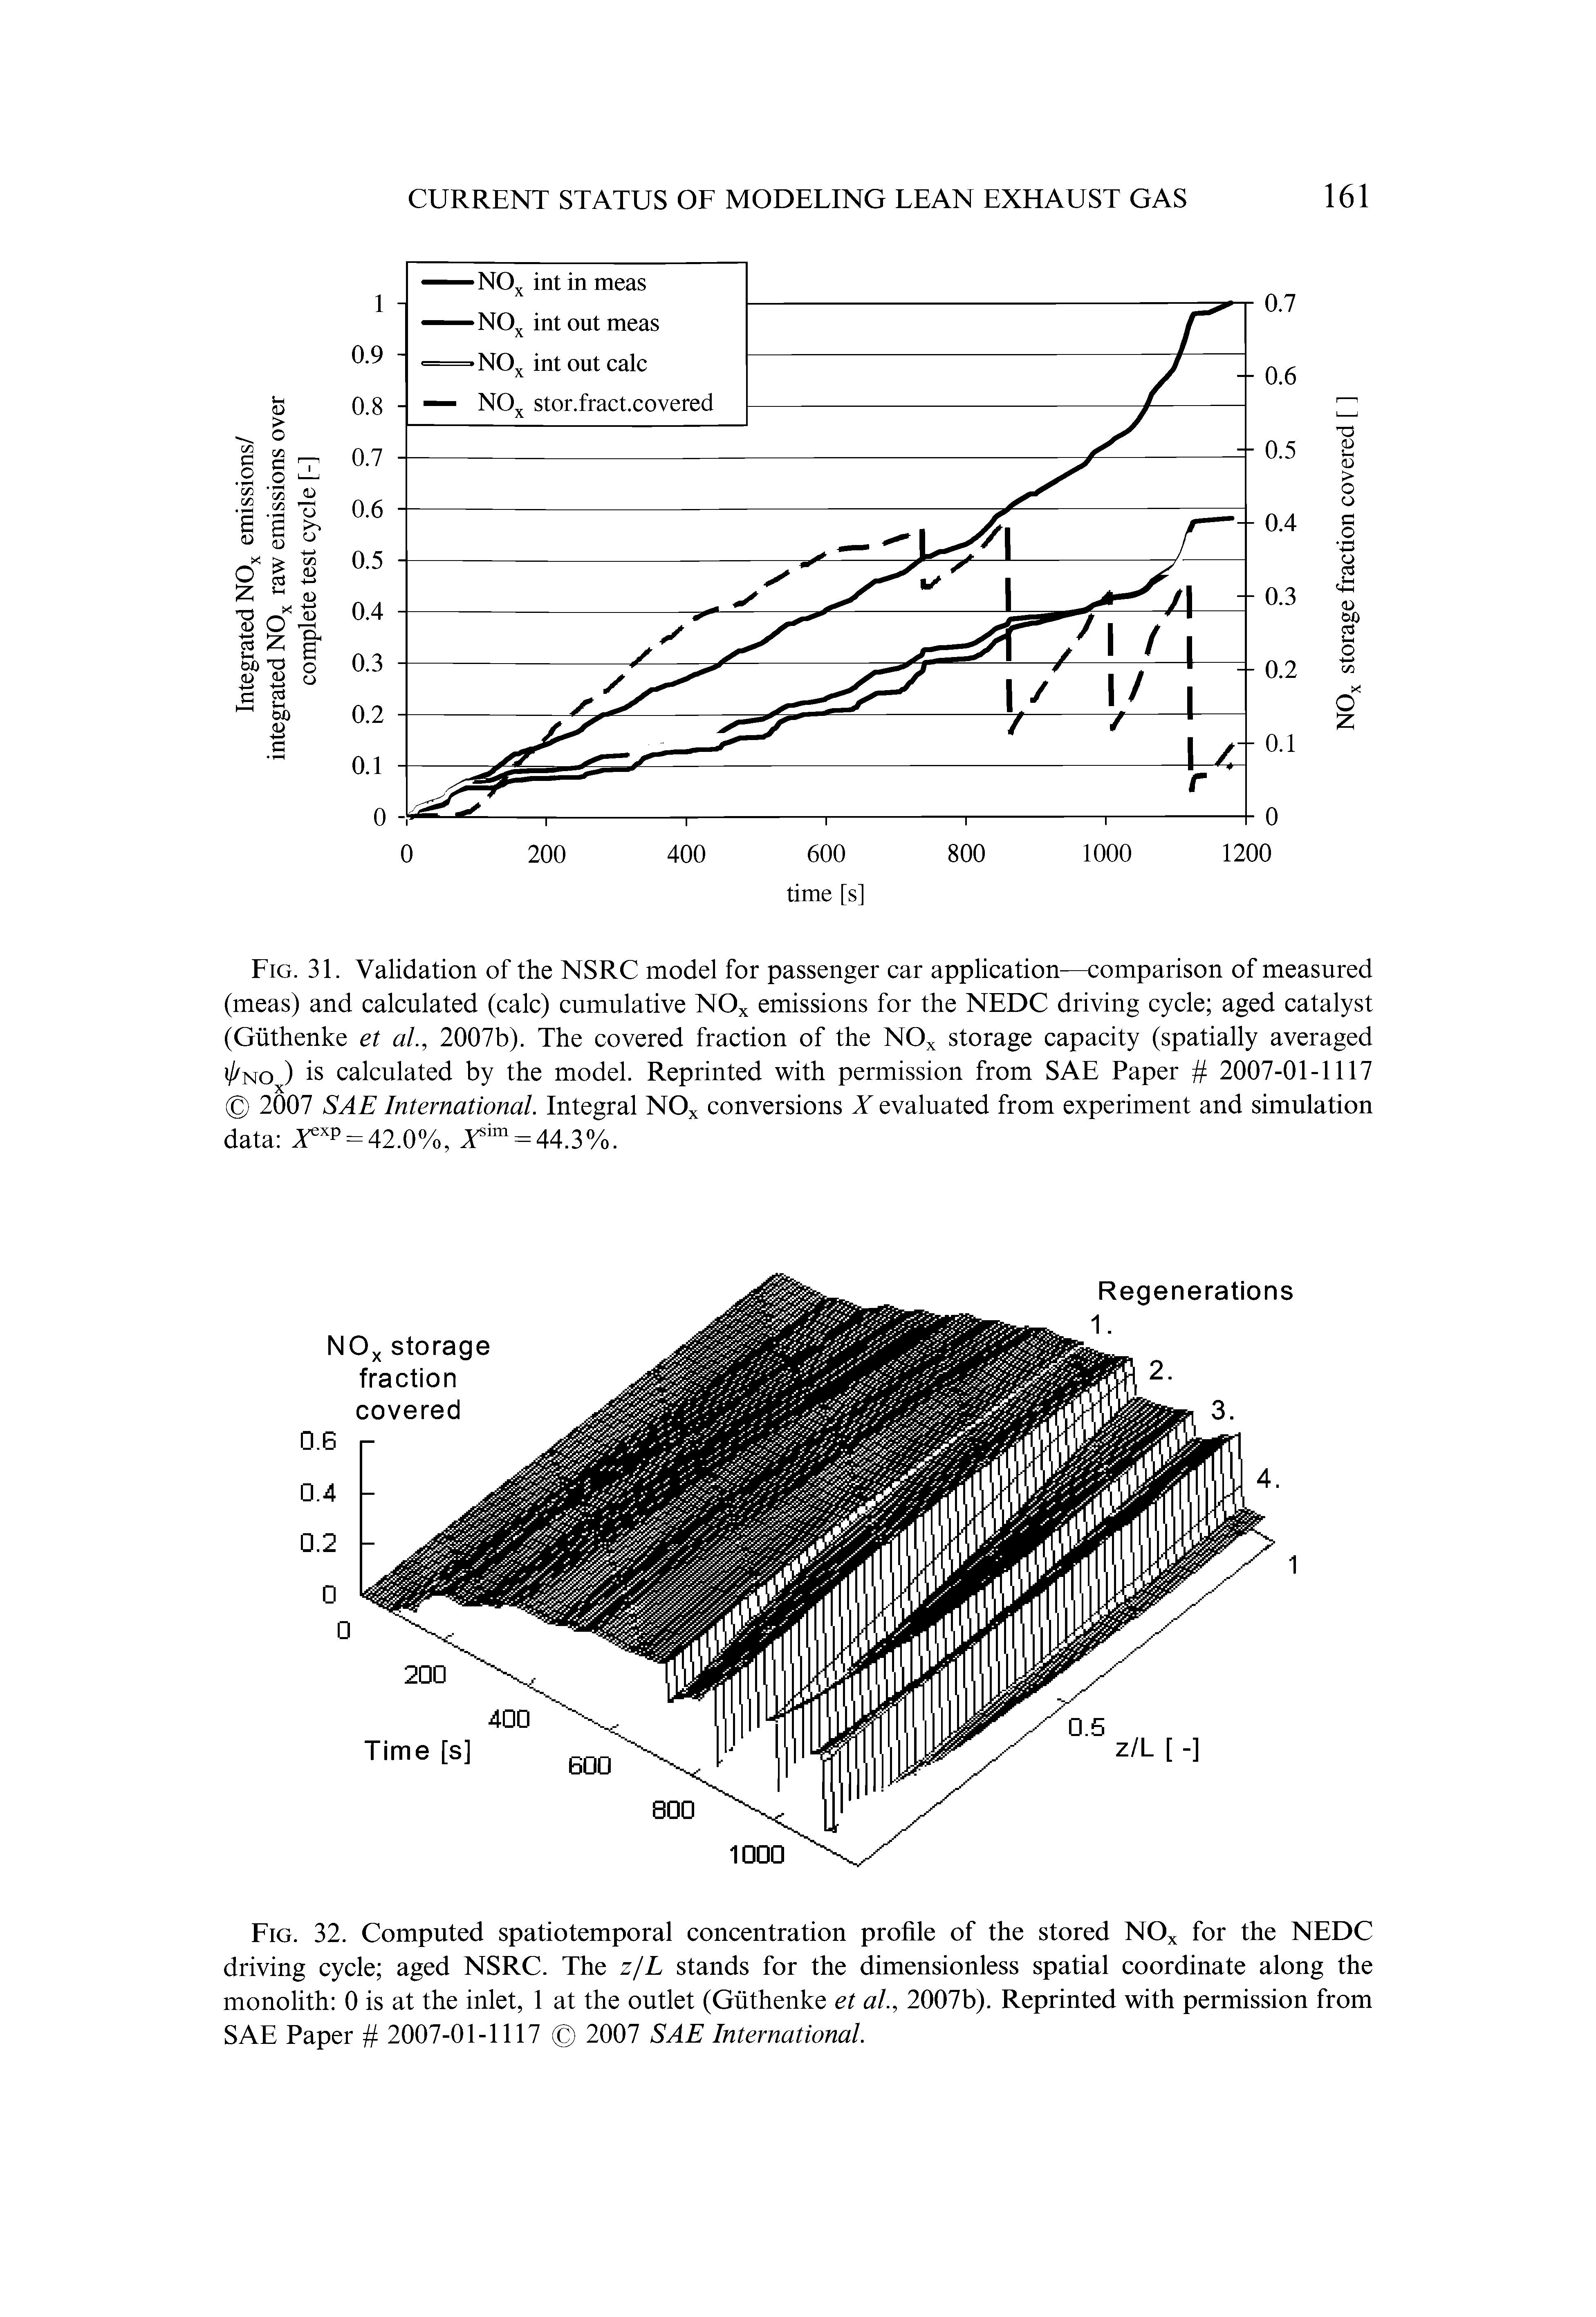 Fig. 32. Computed spatiotemporal concentration profile of the stored NOx for the NEDC driving cycle aged NSRC. The z/L stands for the dimensionless spatial coordinate along the monolith 0 is at the inlet, 1 at the outlet (Giithenke et al., 2007b). Reprinted with permission from SAE Paper 2007-01-1117 2007 SAE International.